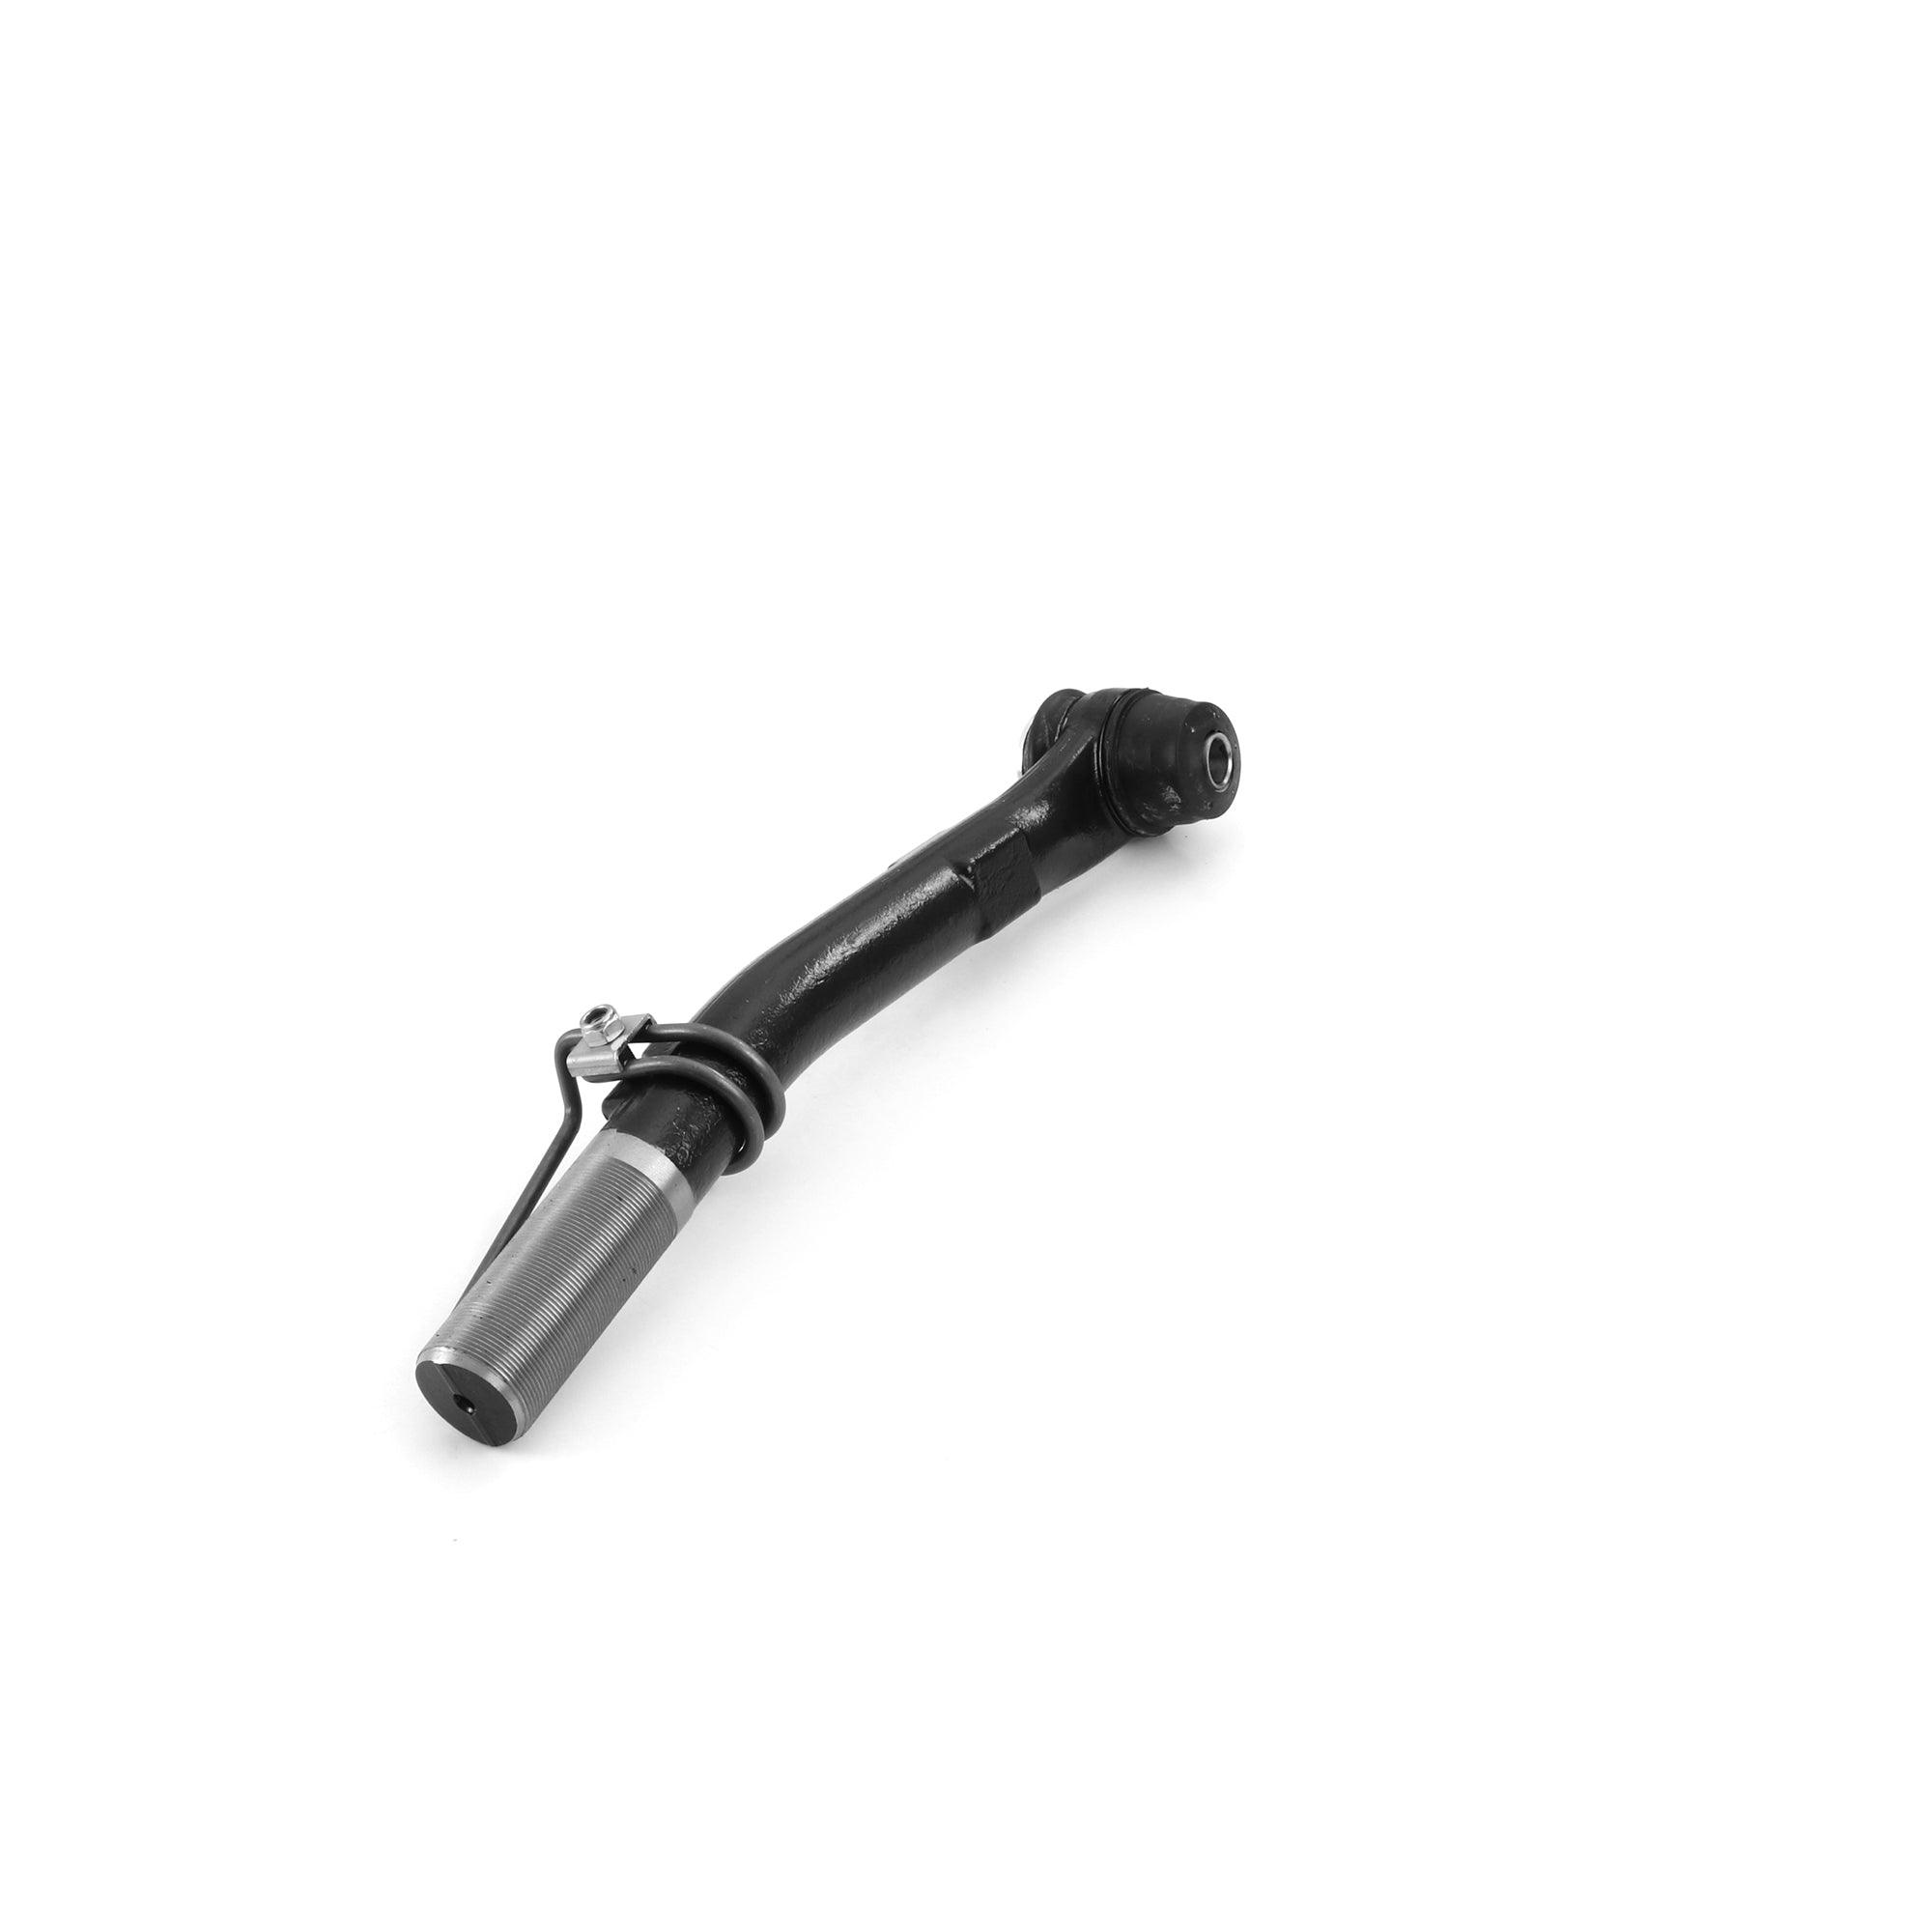 Right Outer Tie Rod End 45589MT - Metrix Premium Chassis Parts